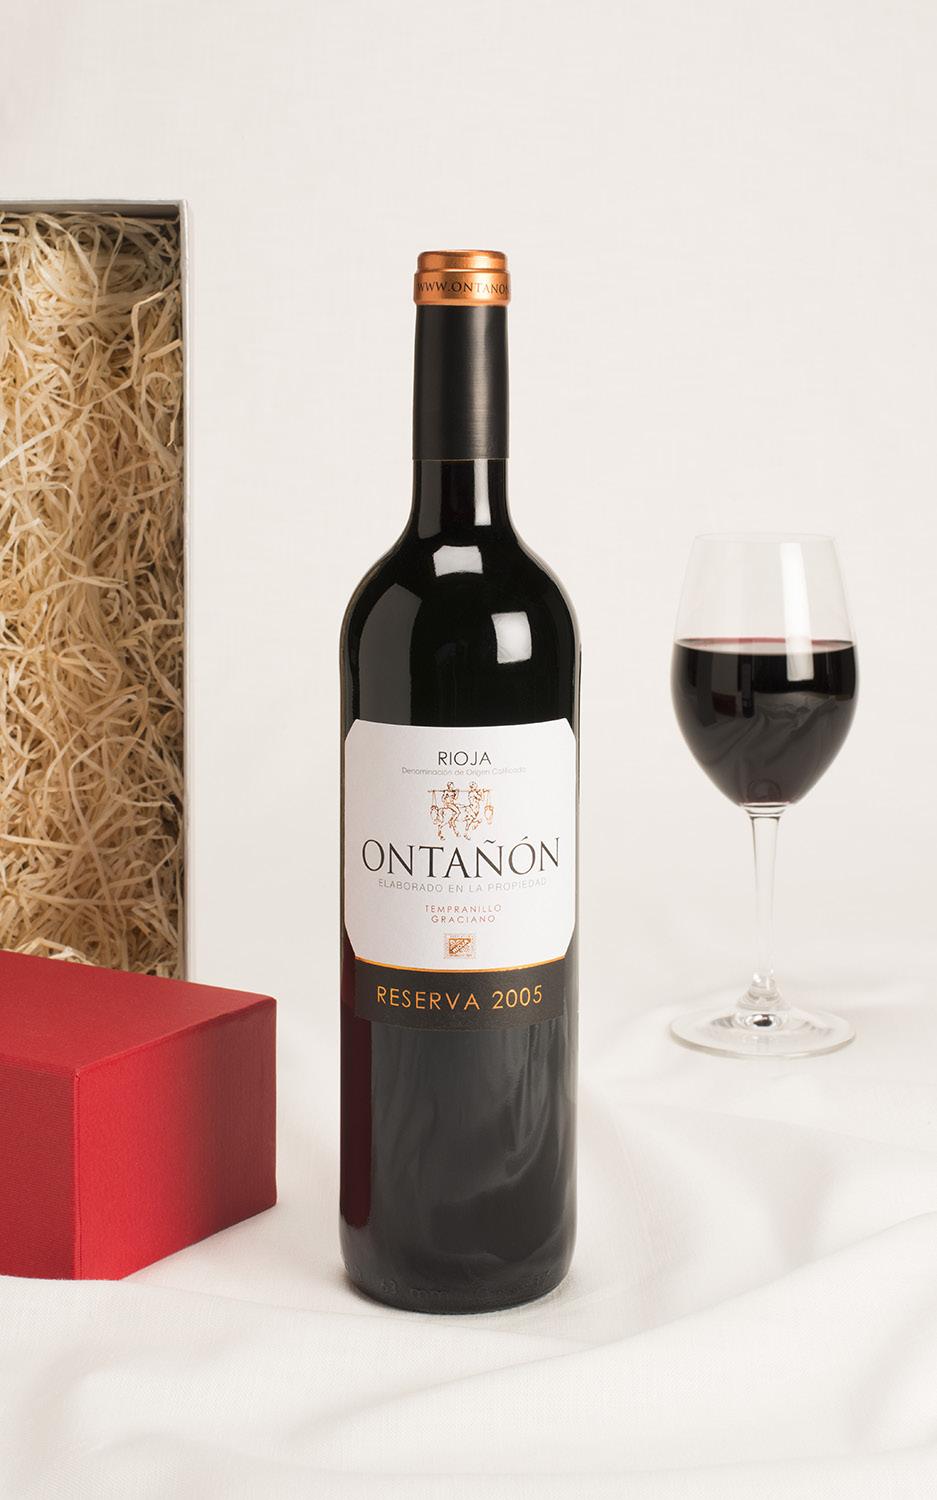 50 plus vat 1 bottle Rioja Gift Ontanon Rioja Reserva Packed in either a